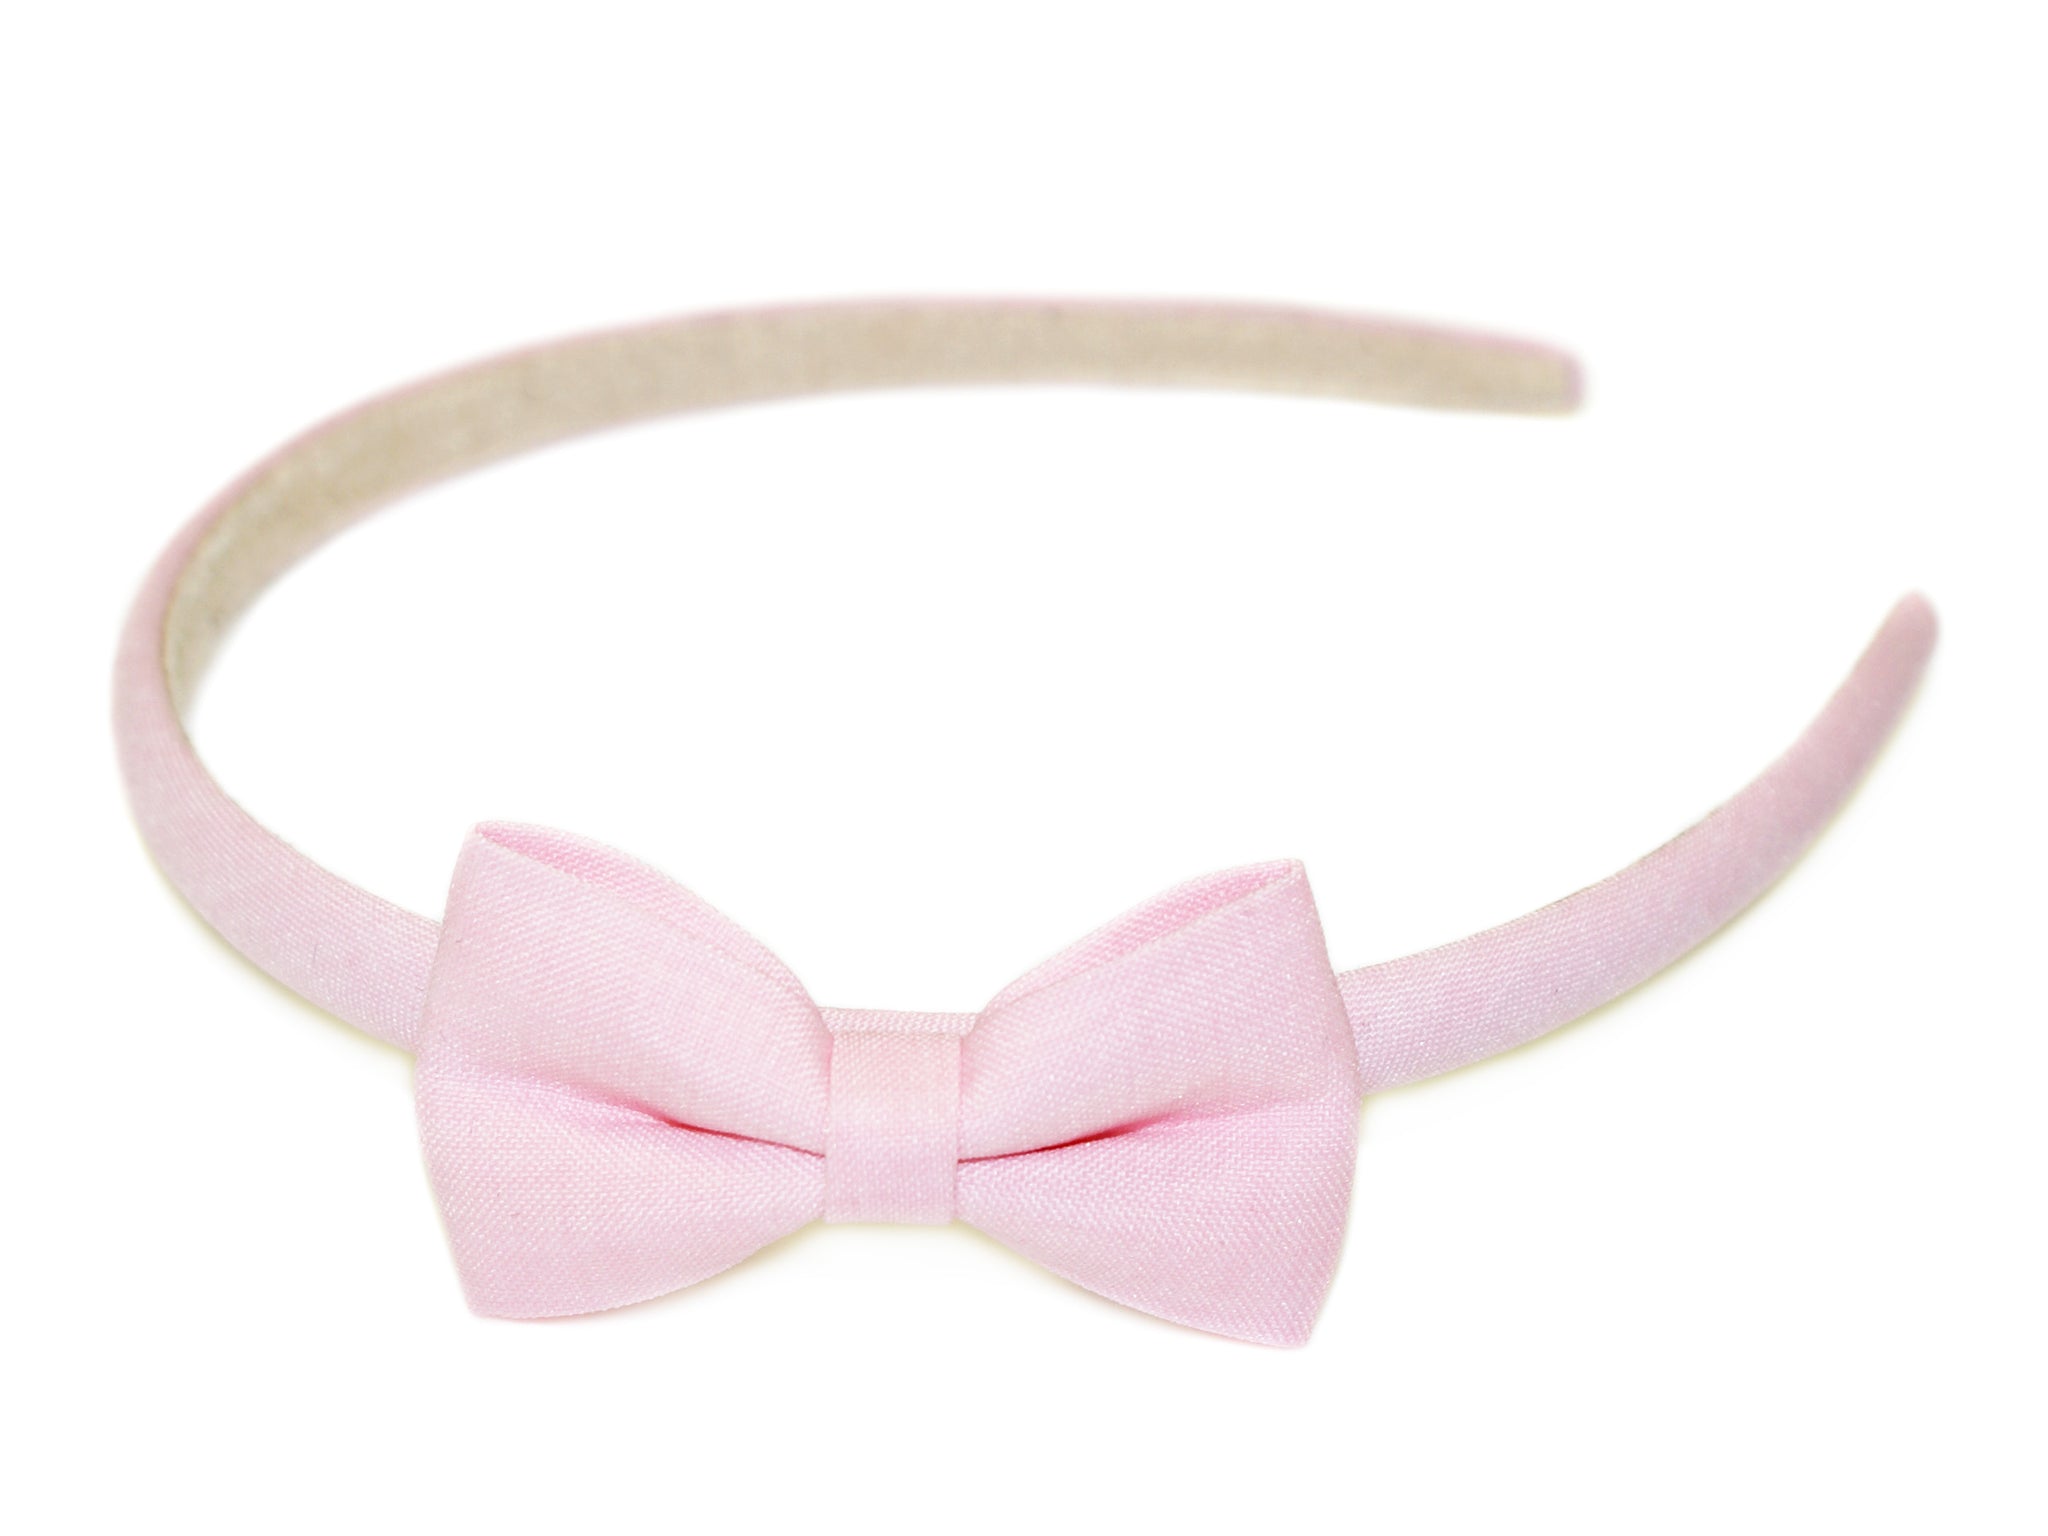 Linen Bow Alice Band - Light Pink